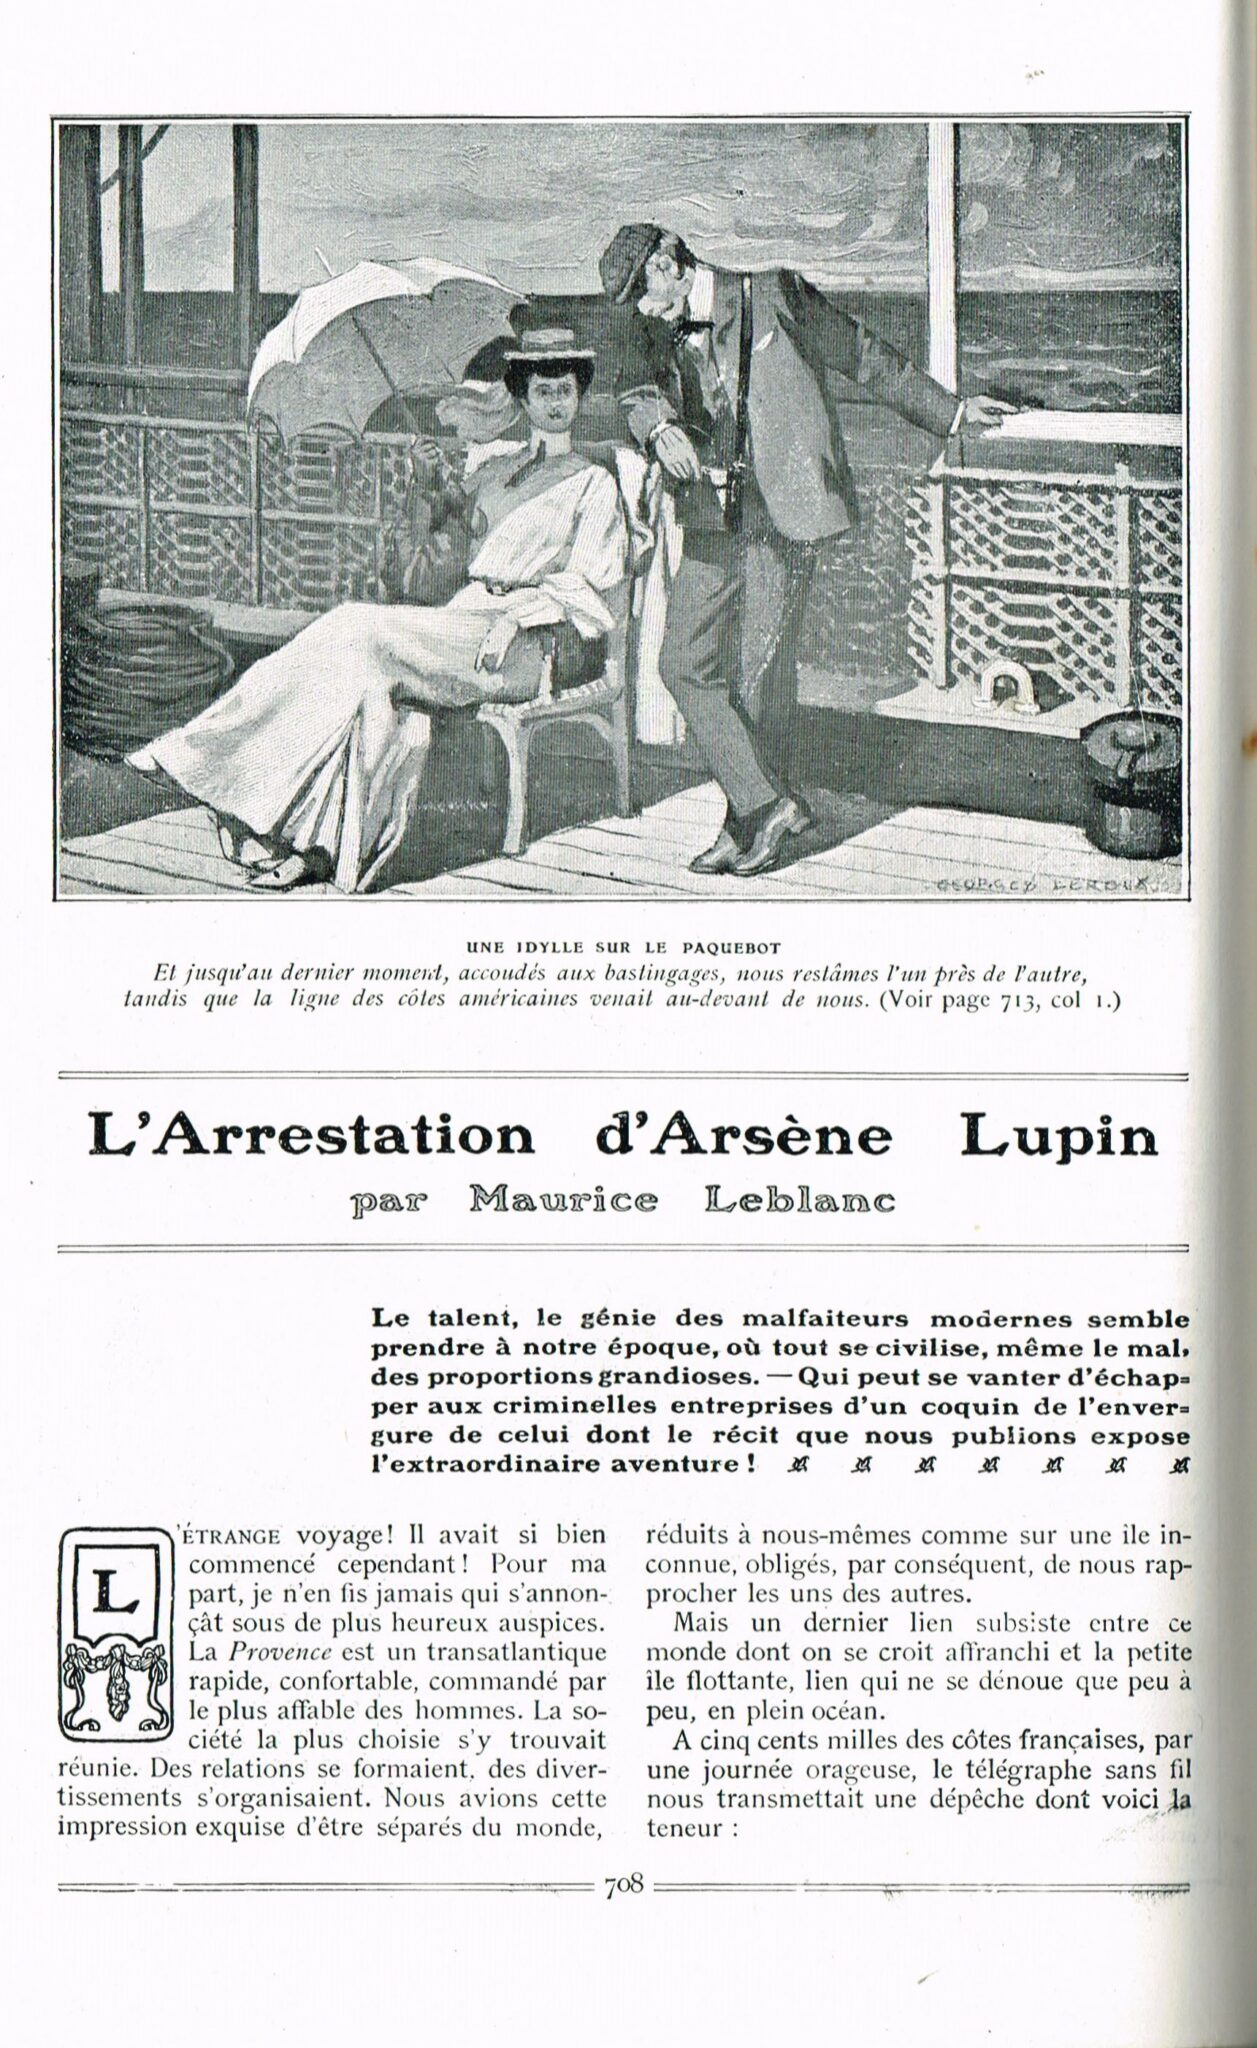 the arrest of arsène lupin 1905